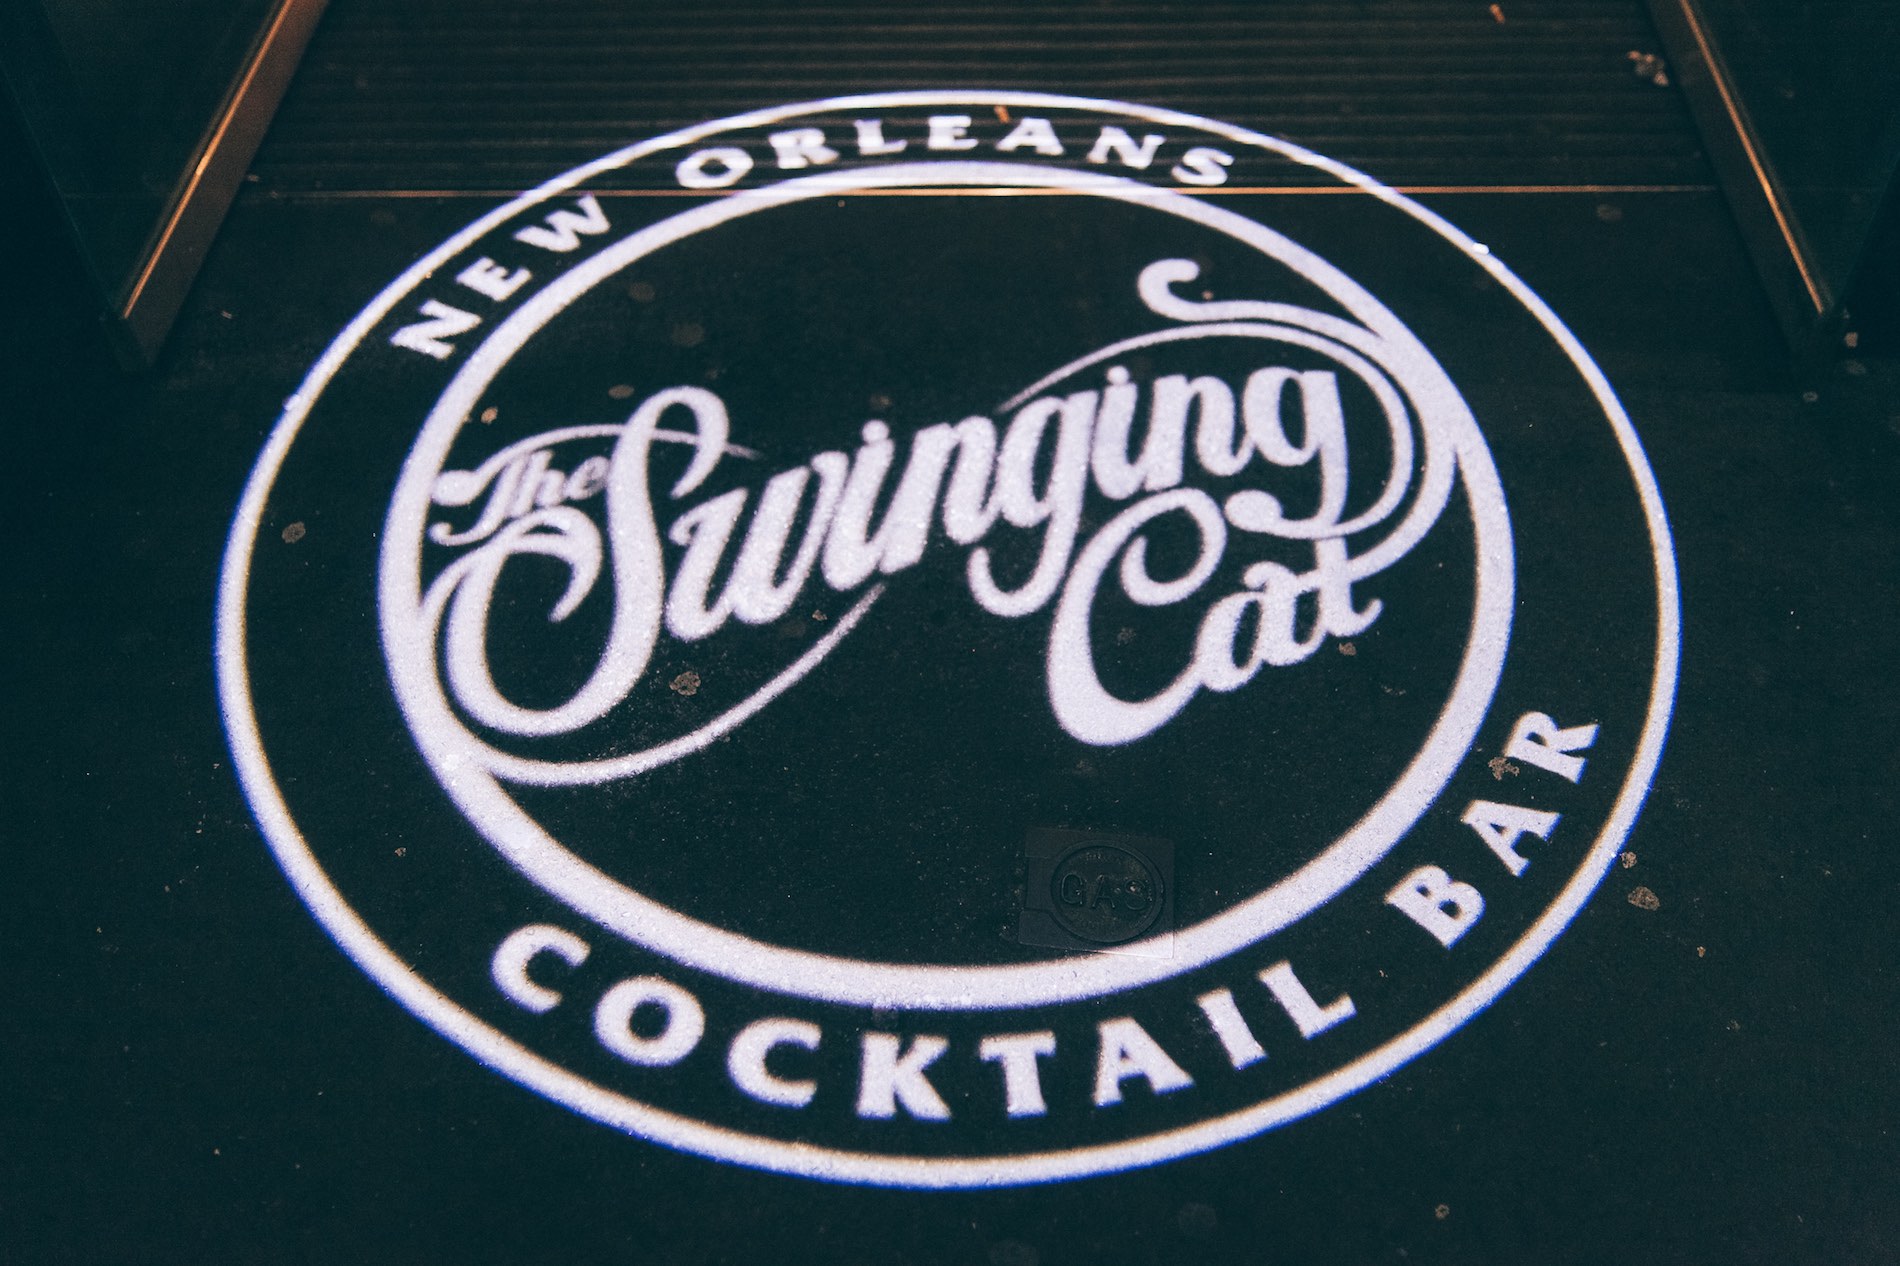 The Swinging Cat Cocktail Bar